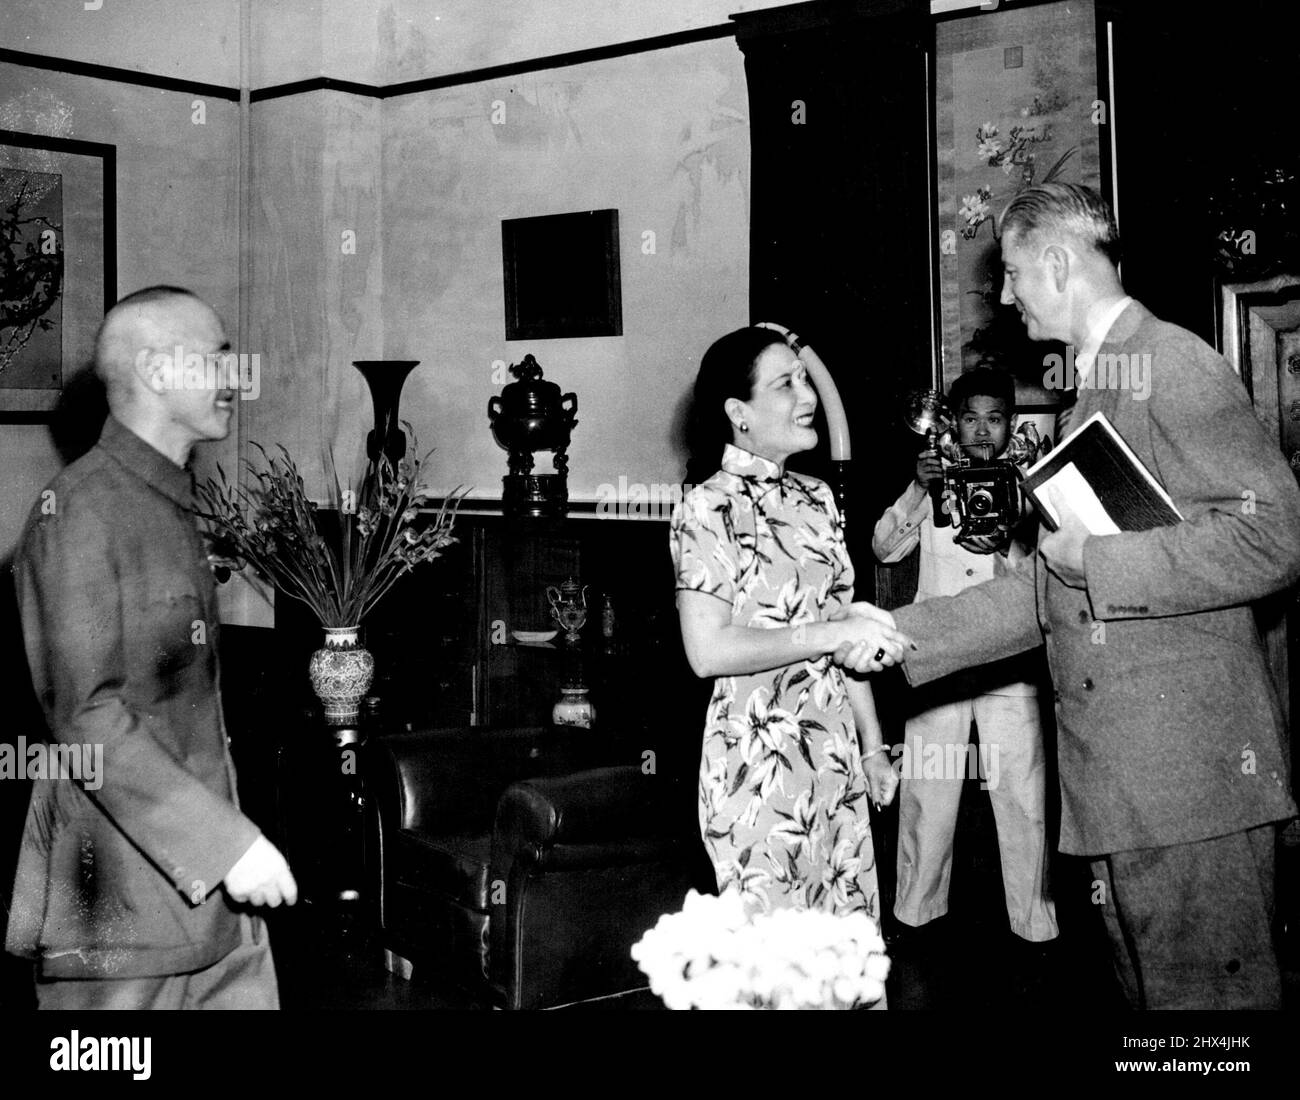 Wedemeyer Visits Chiang Kai-Sheks -- Lieut. Gen. Albert C. Wedemeyer (right) is greeted by Madame Chiang Kai-Shek during a formal visit at Nanking, China, July 23. at left is the Generalissimo. Wedemeyer is in China on a Fact-Finding mission fro press Harry S. Truman. January 12, 1950. (Photo by Associated Press Photo). Stock Photo